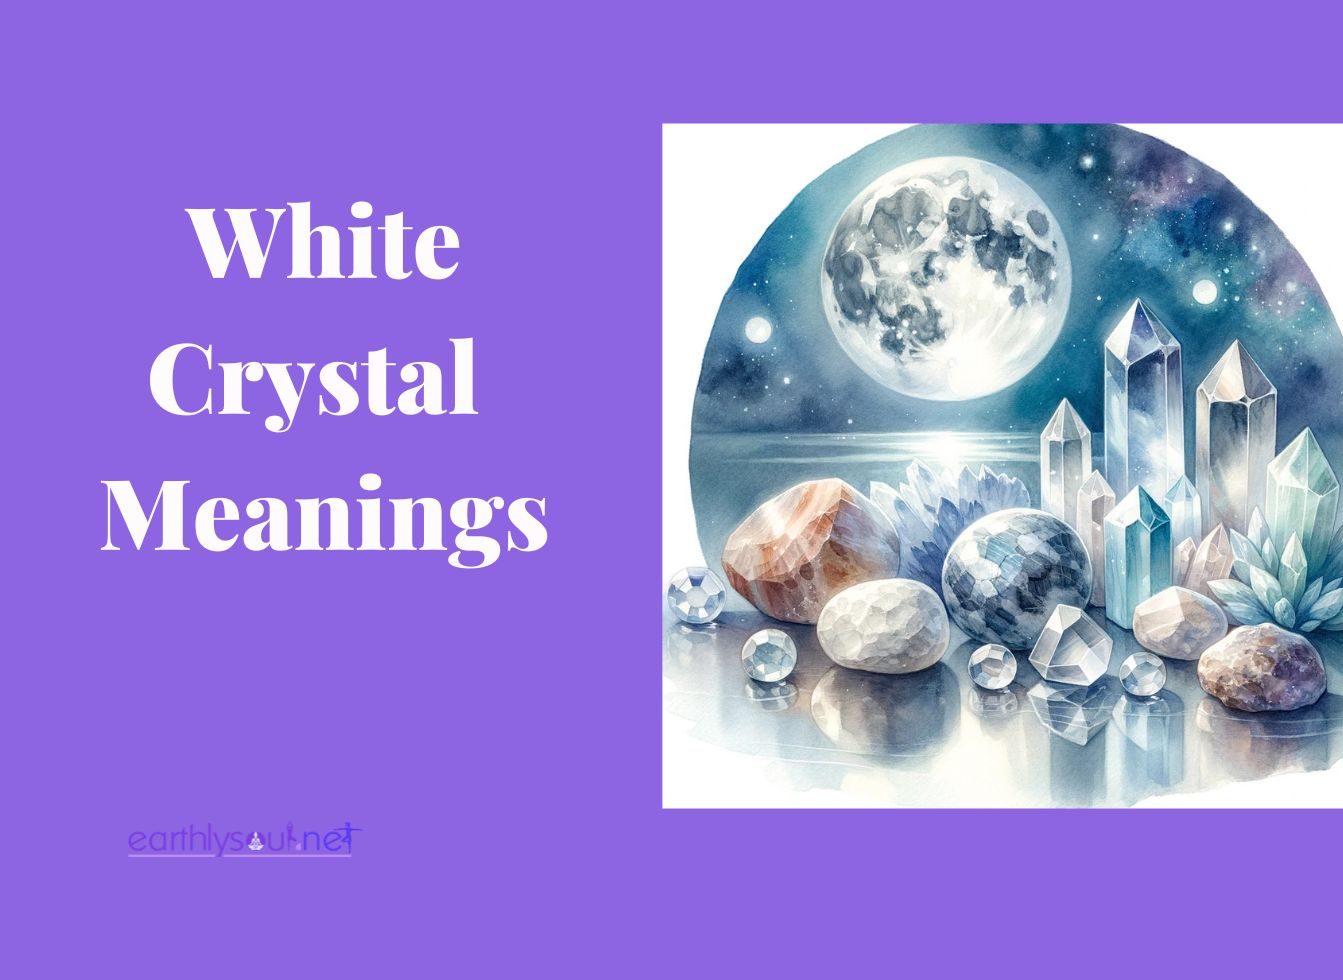 White crystal meaning featured image